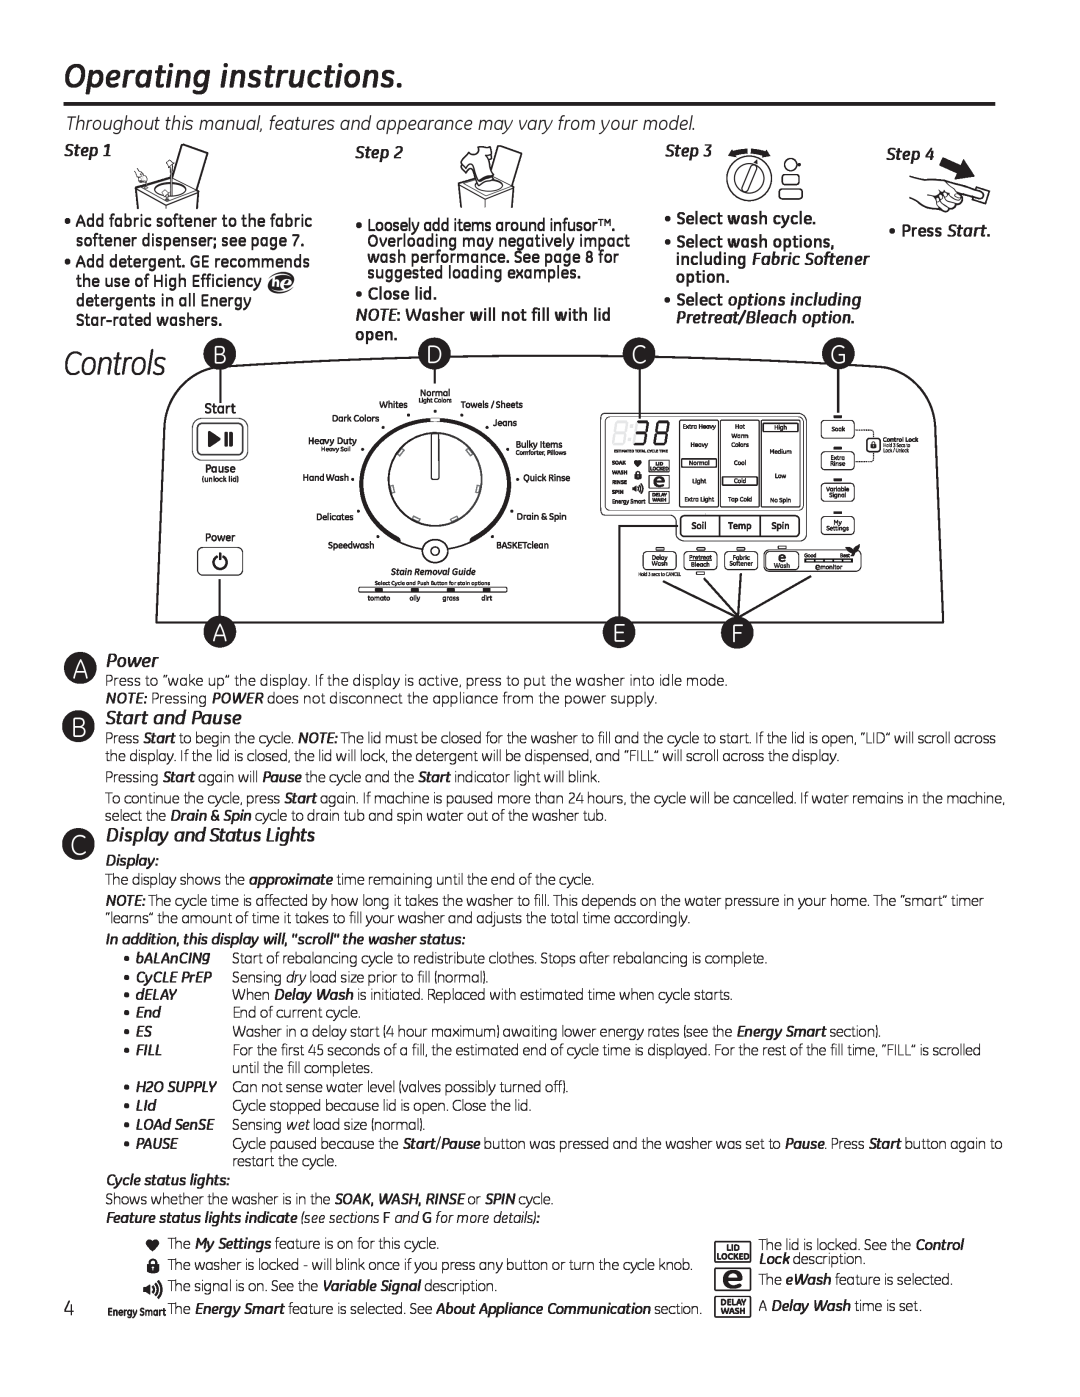 GE g006 owner manual Operating instructions, Controls B, A B C, Power, Start and Pause, Display and Status Lights, Ae F 